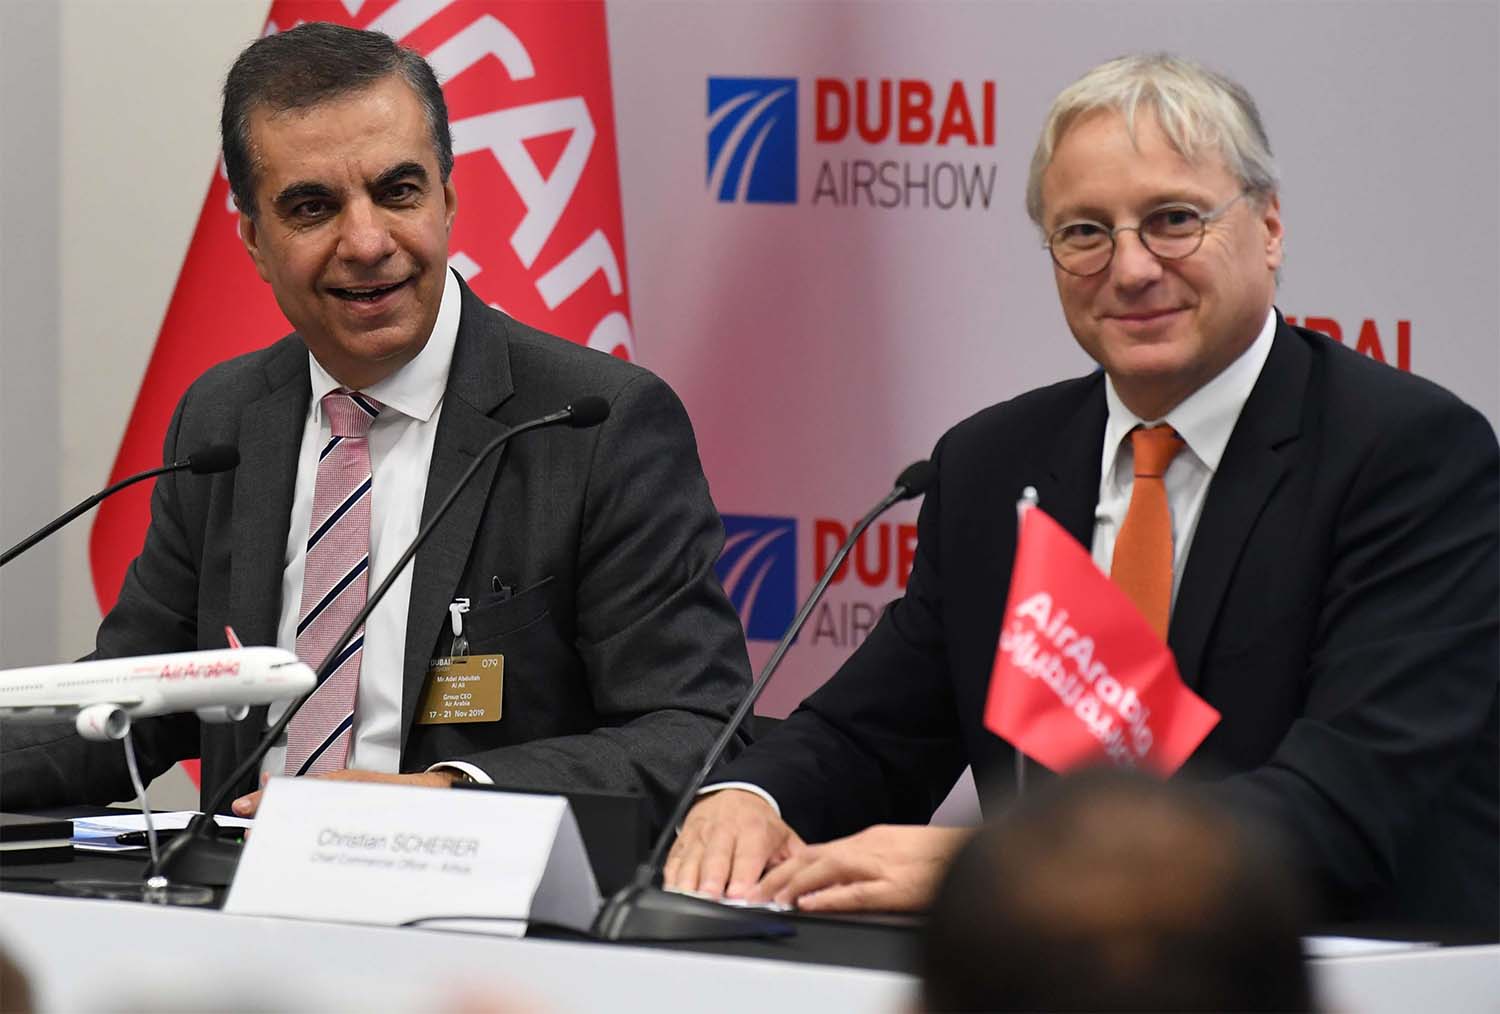 Adel Ali (L), CEO of Air Arabia, and Christian Scherer, Chief Commercial Officer (CCO) at Airbus at Dubai Airshow